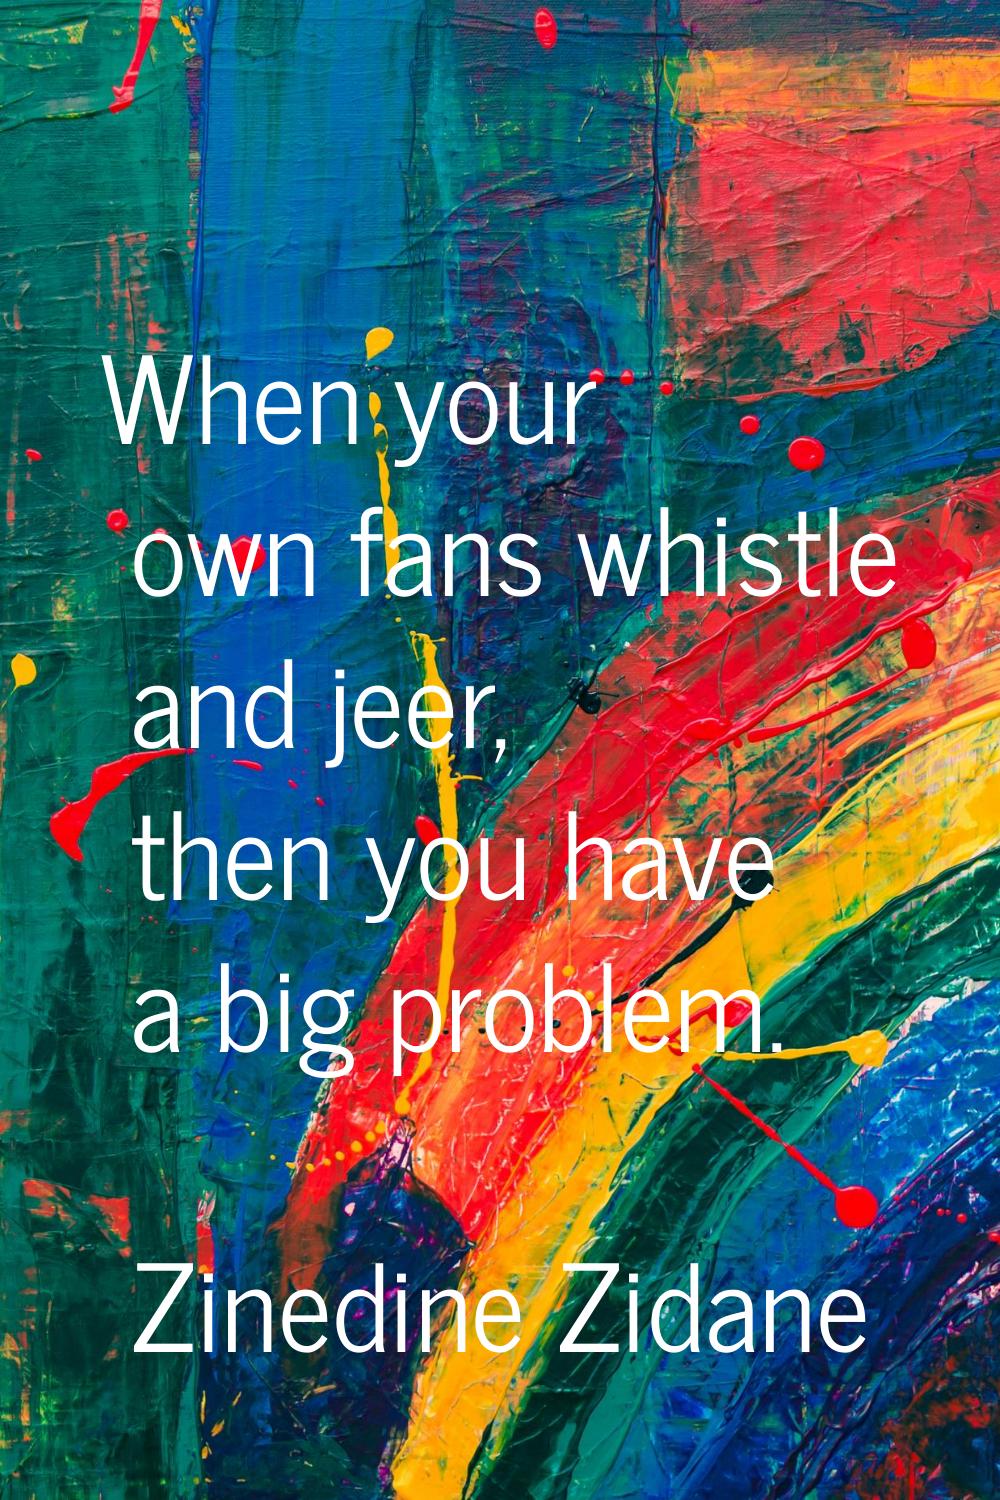 When your own fans whistle and jeer, then you have a big problem.